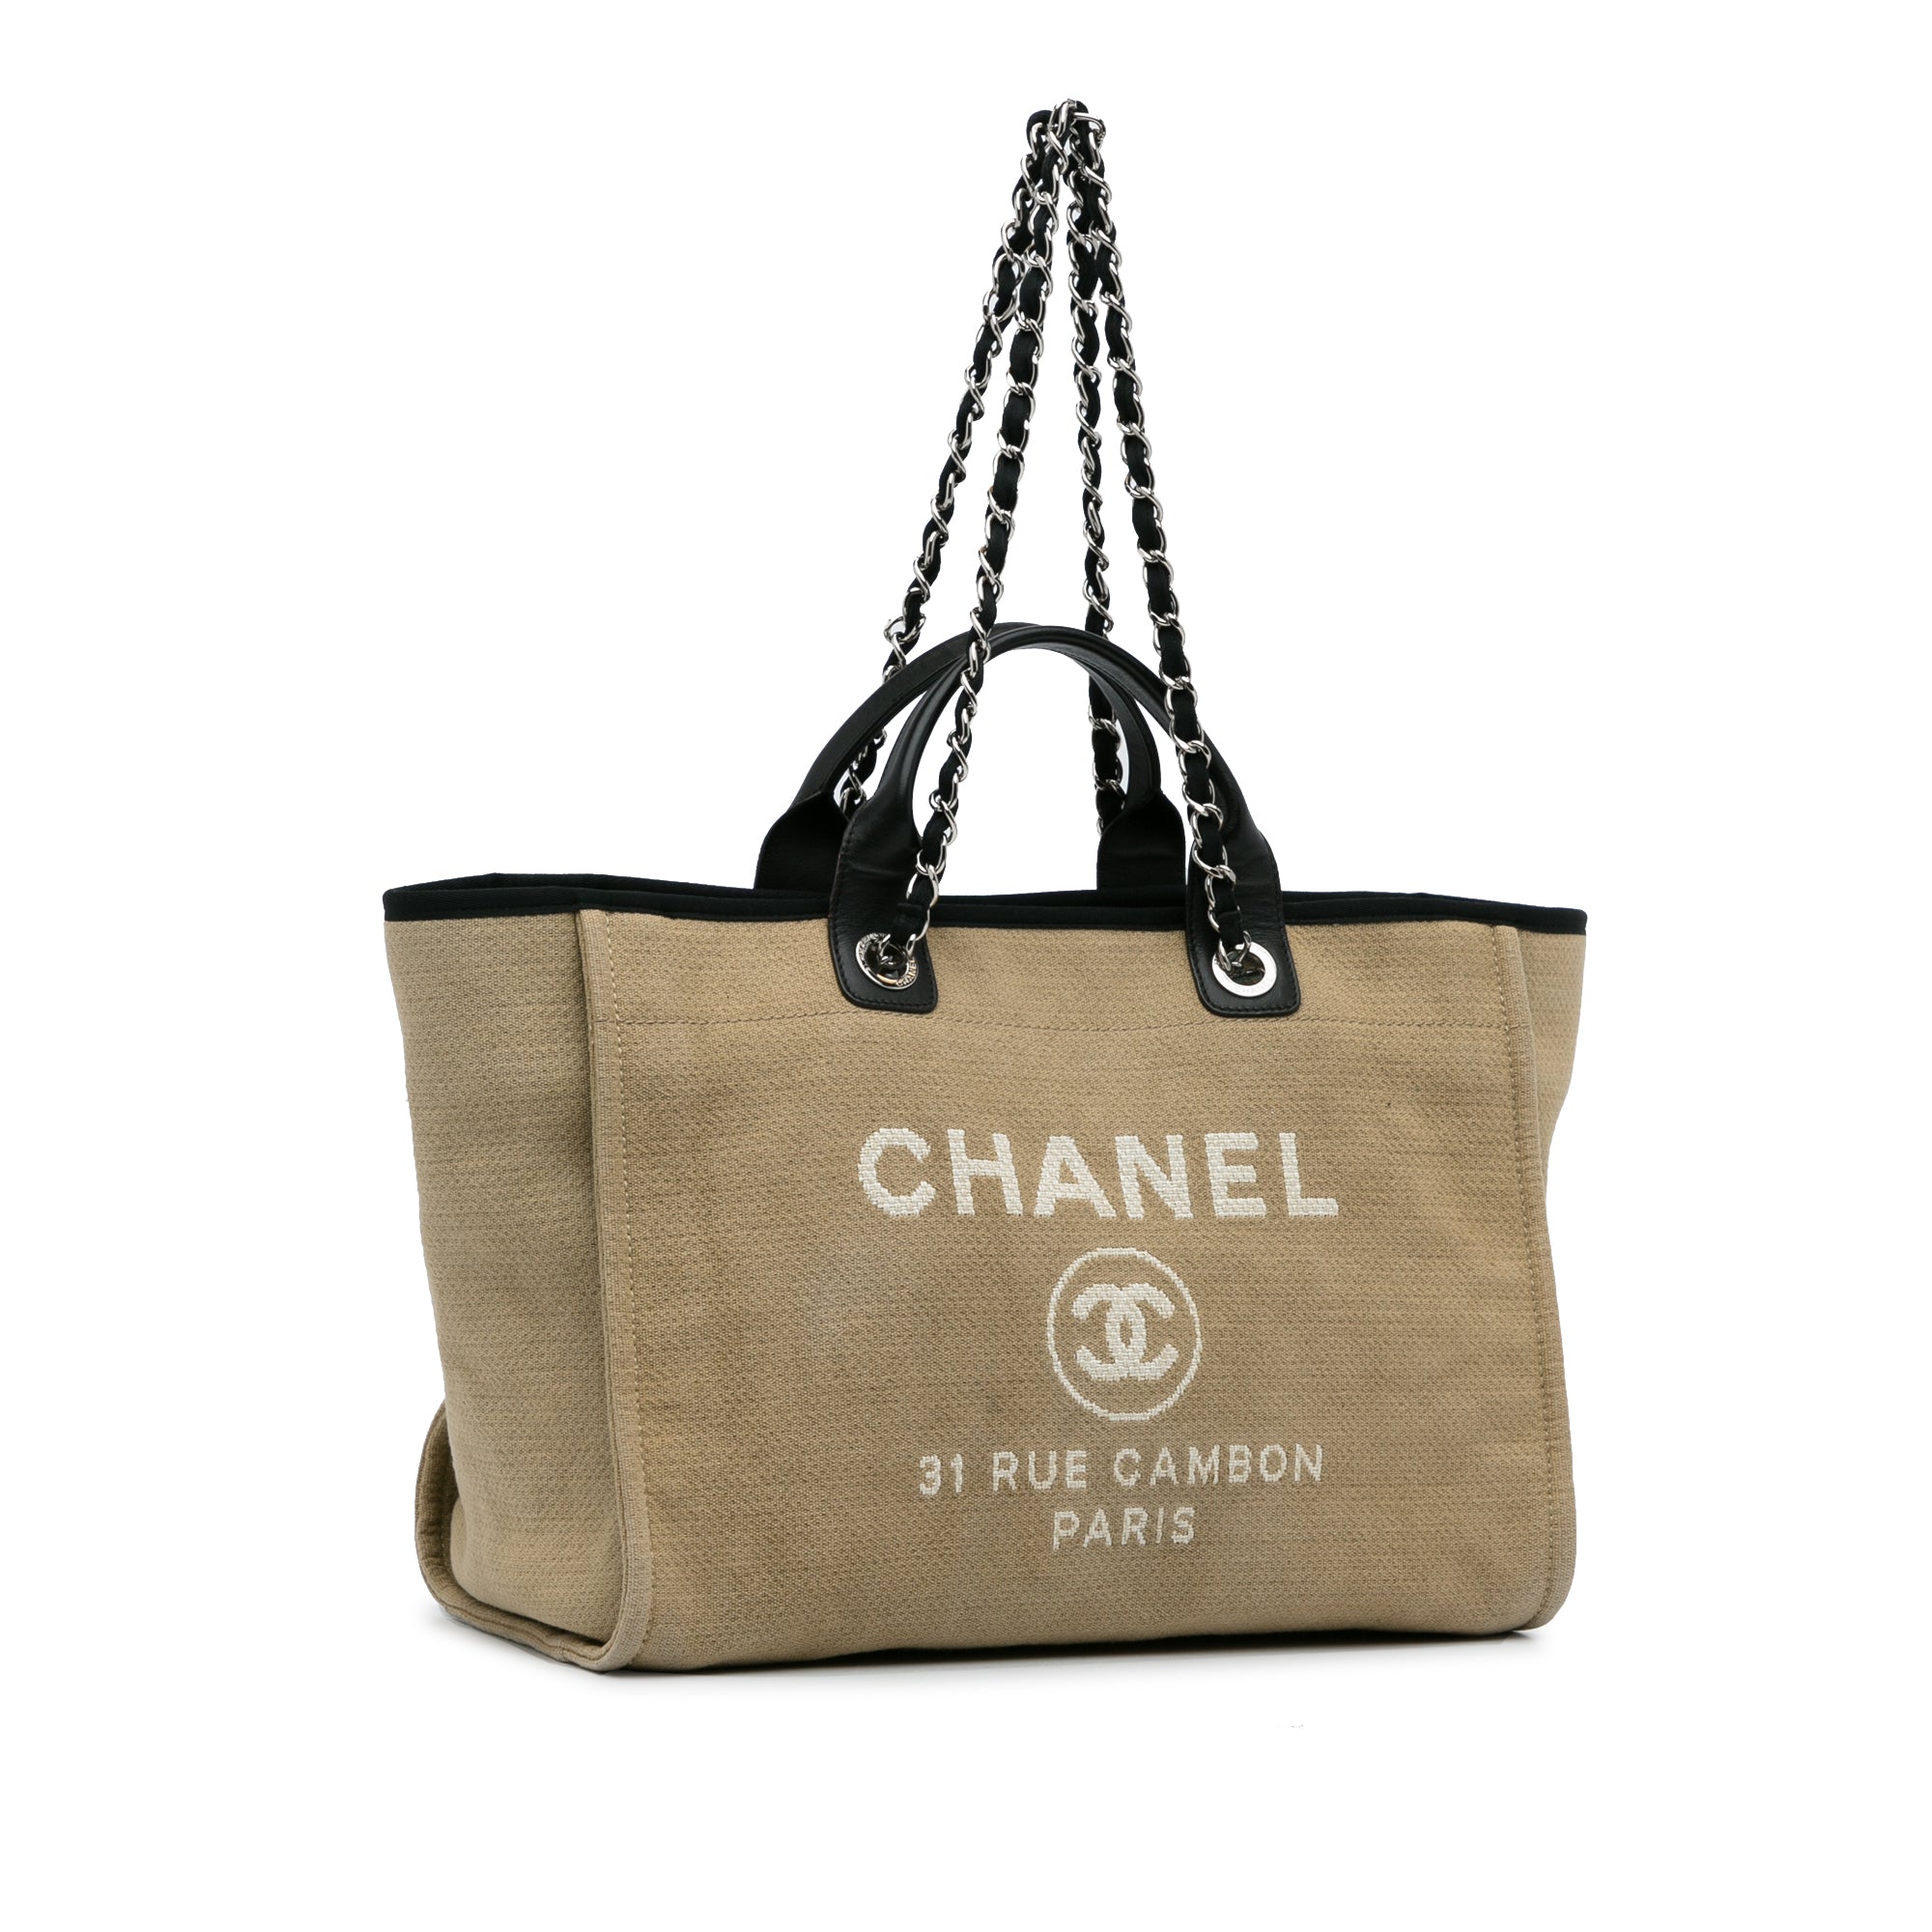 Chanel Yellow Raffia Deauville Shopping Tote Bag Chanel